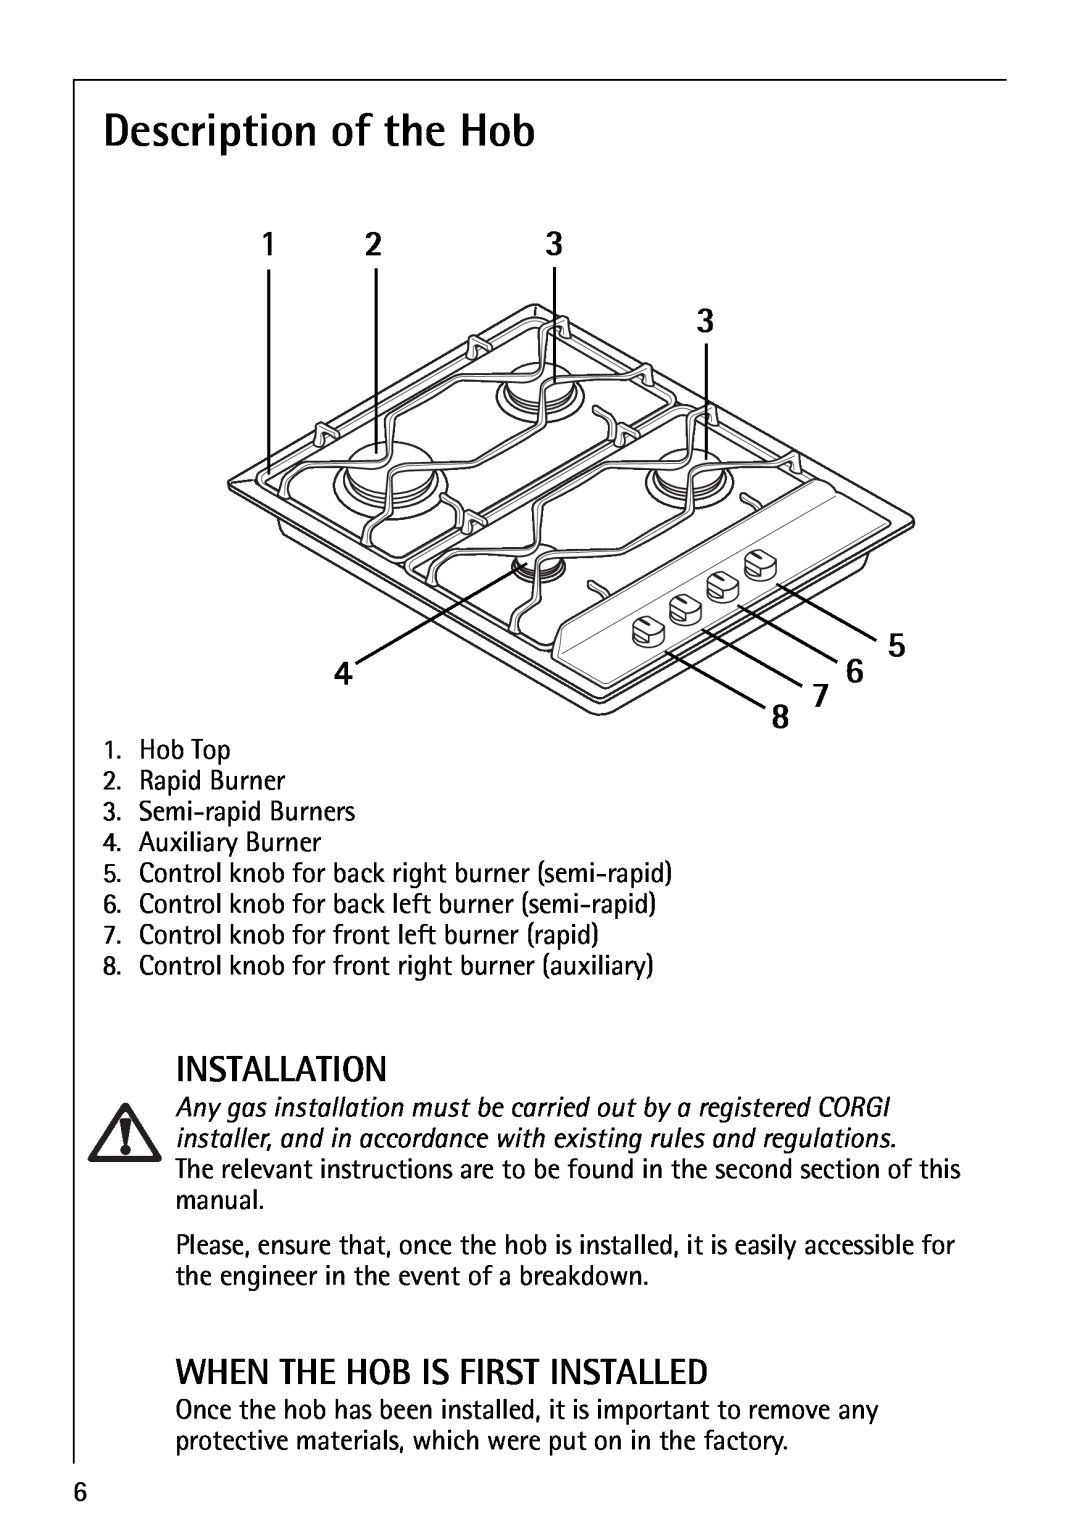 AEG 35601G, 35600G, 34611C, 35610C, 34602G, 35604G Description of the Hob, Installation, When The Hob Is First Installed 